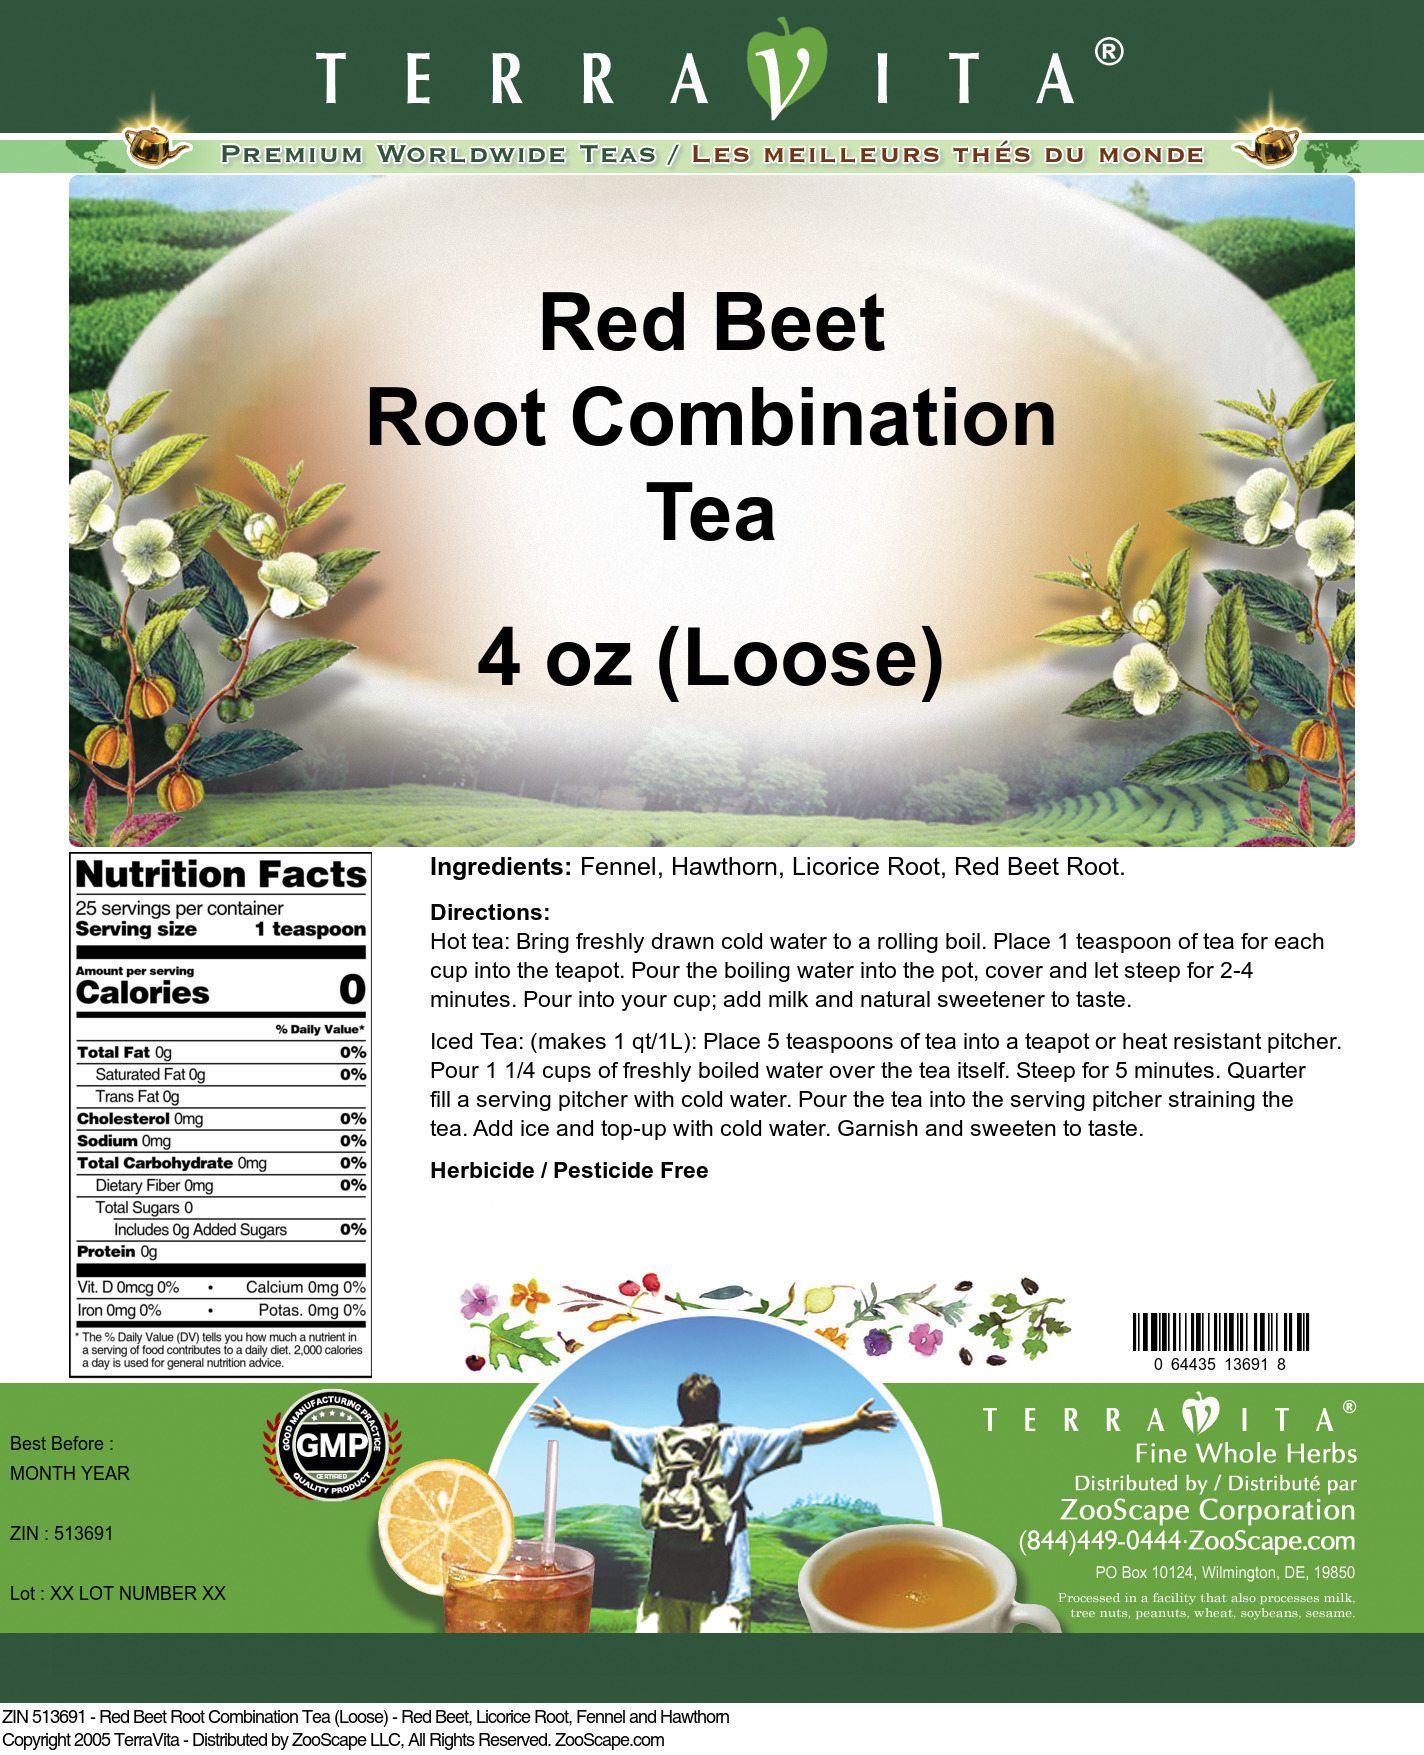 Red Beet Root Combination Tea (Loose) - Red Beet, Licorice Root, Fennel and Hawthorn - Label